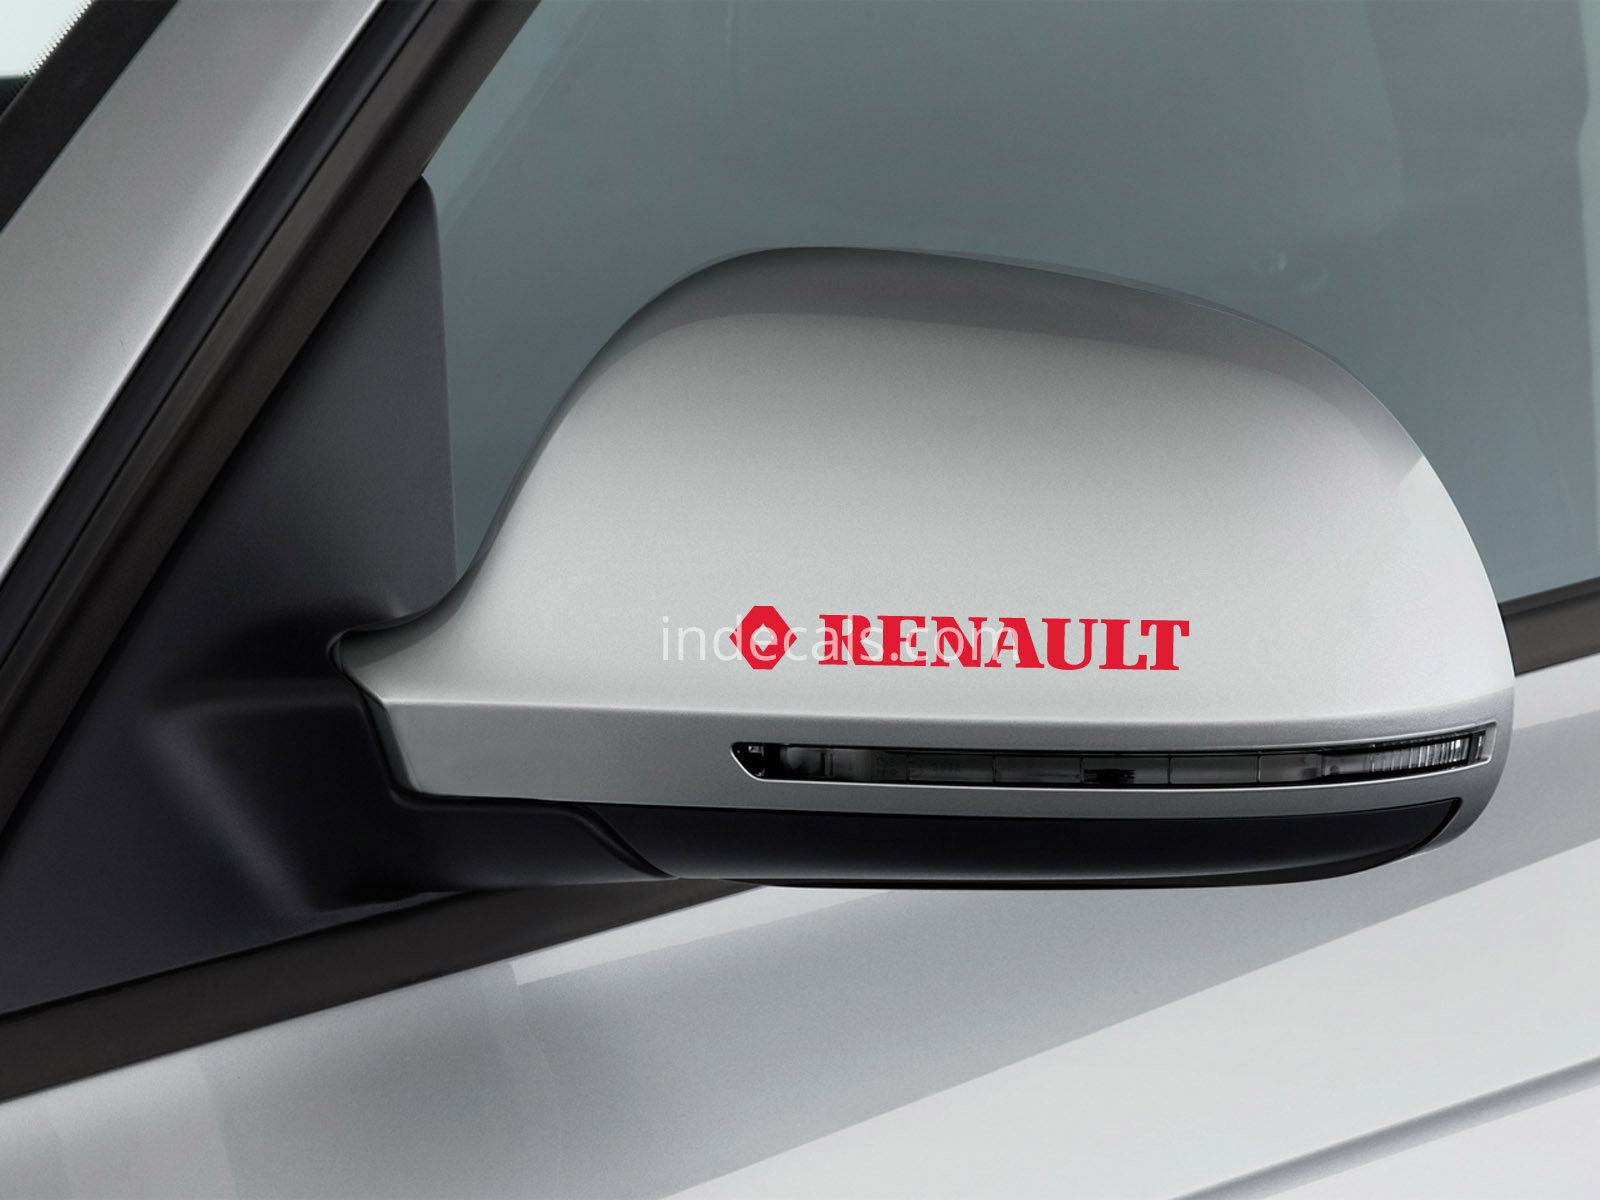 3 x Renault Stickers for Mirrors - Red